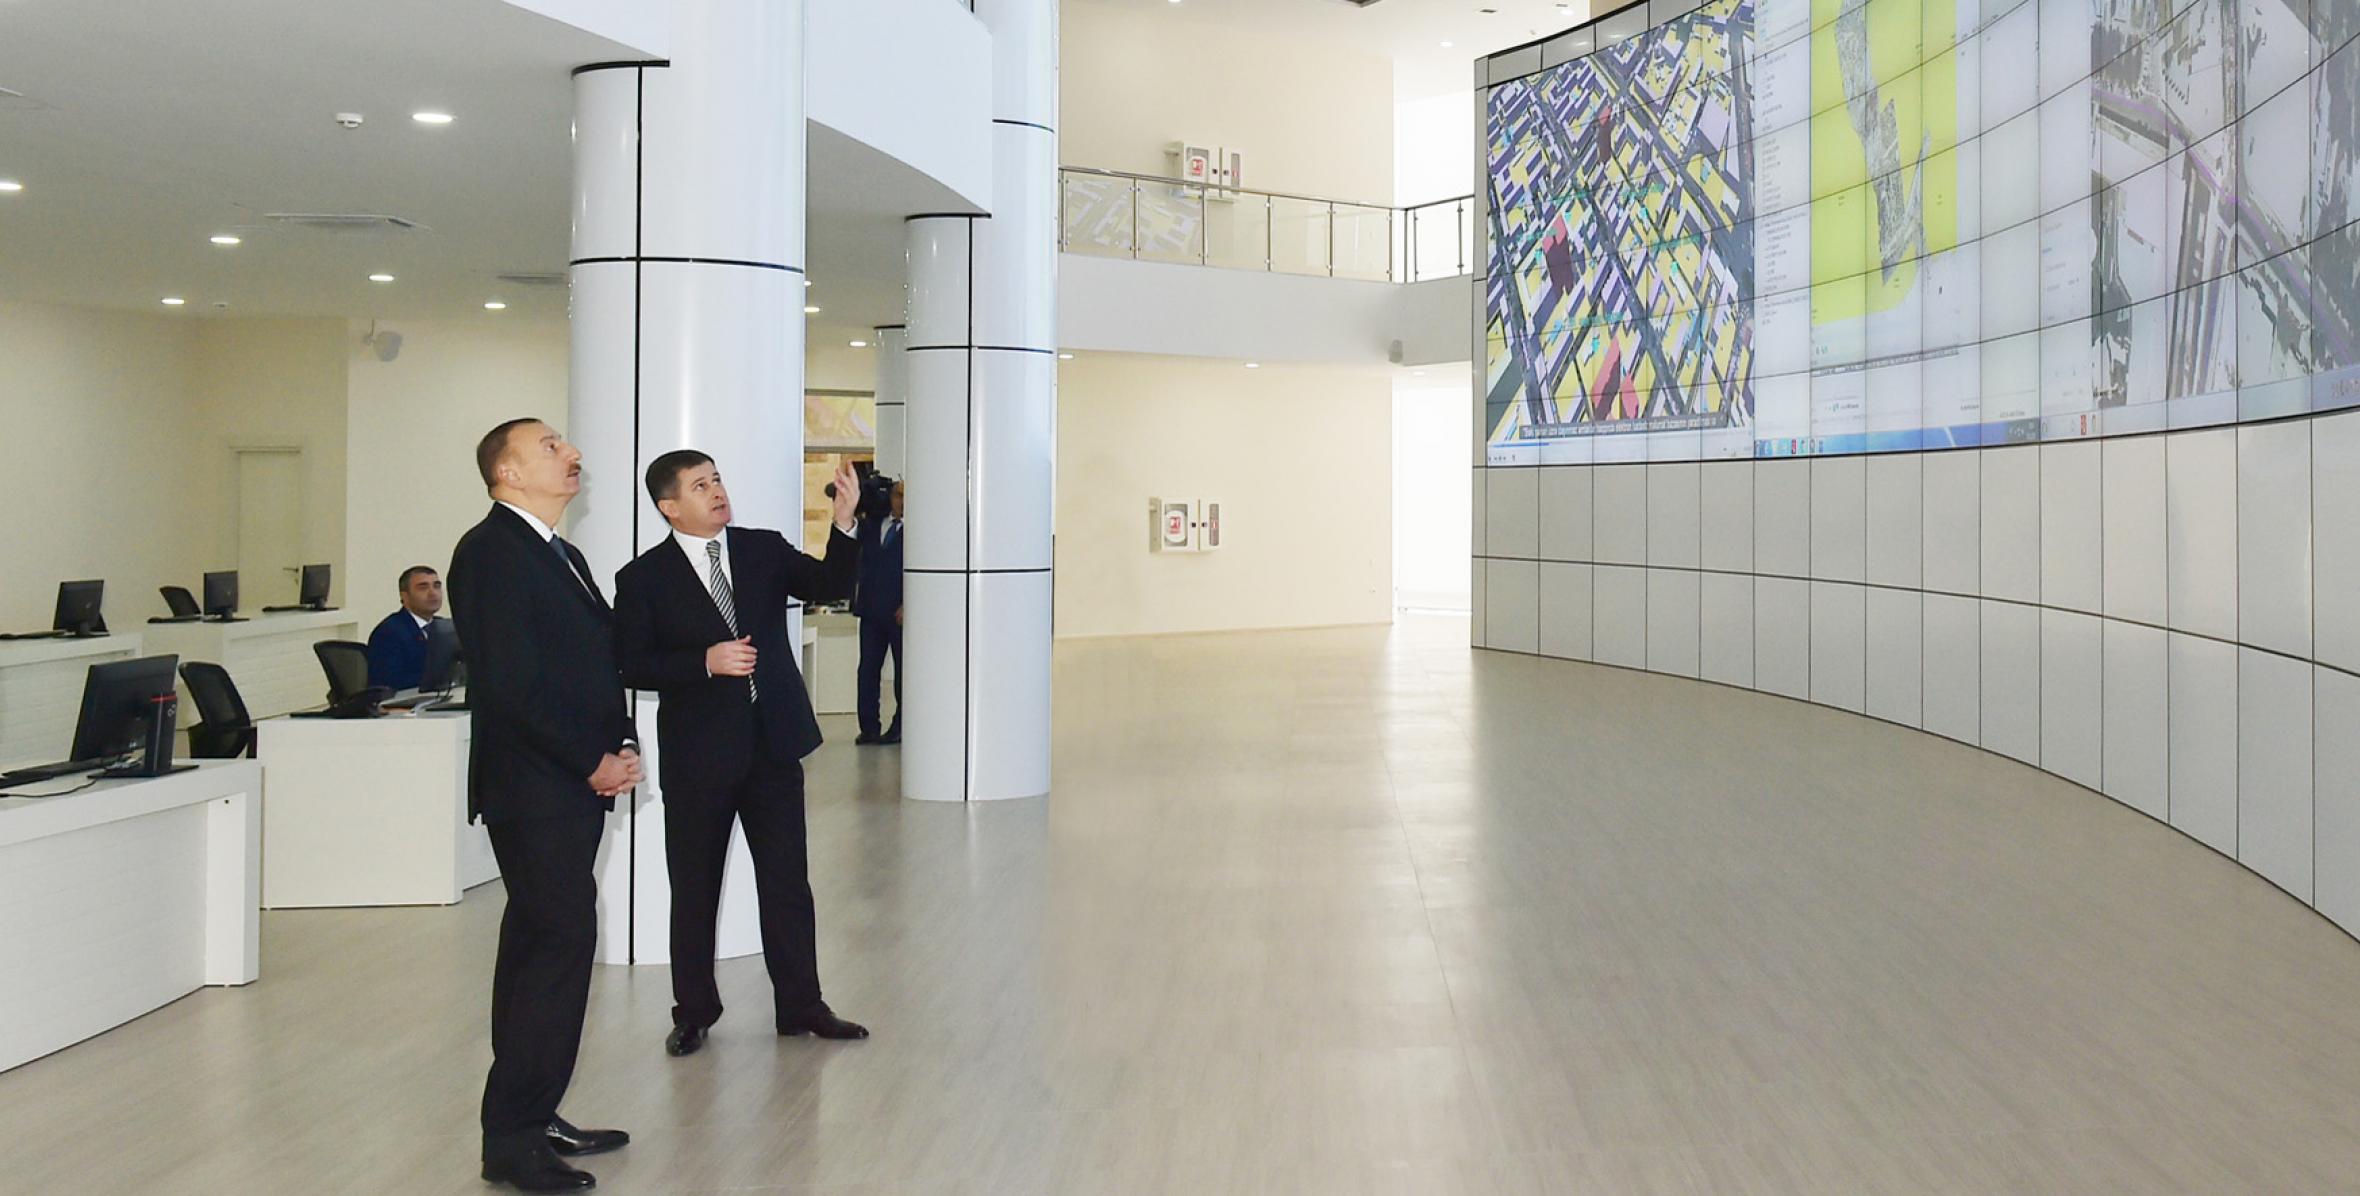 Ilham Aliyev attended the opening of the new Centre of the State Committee on Property Issues